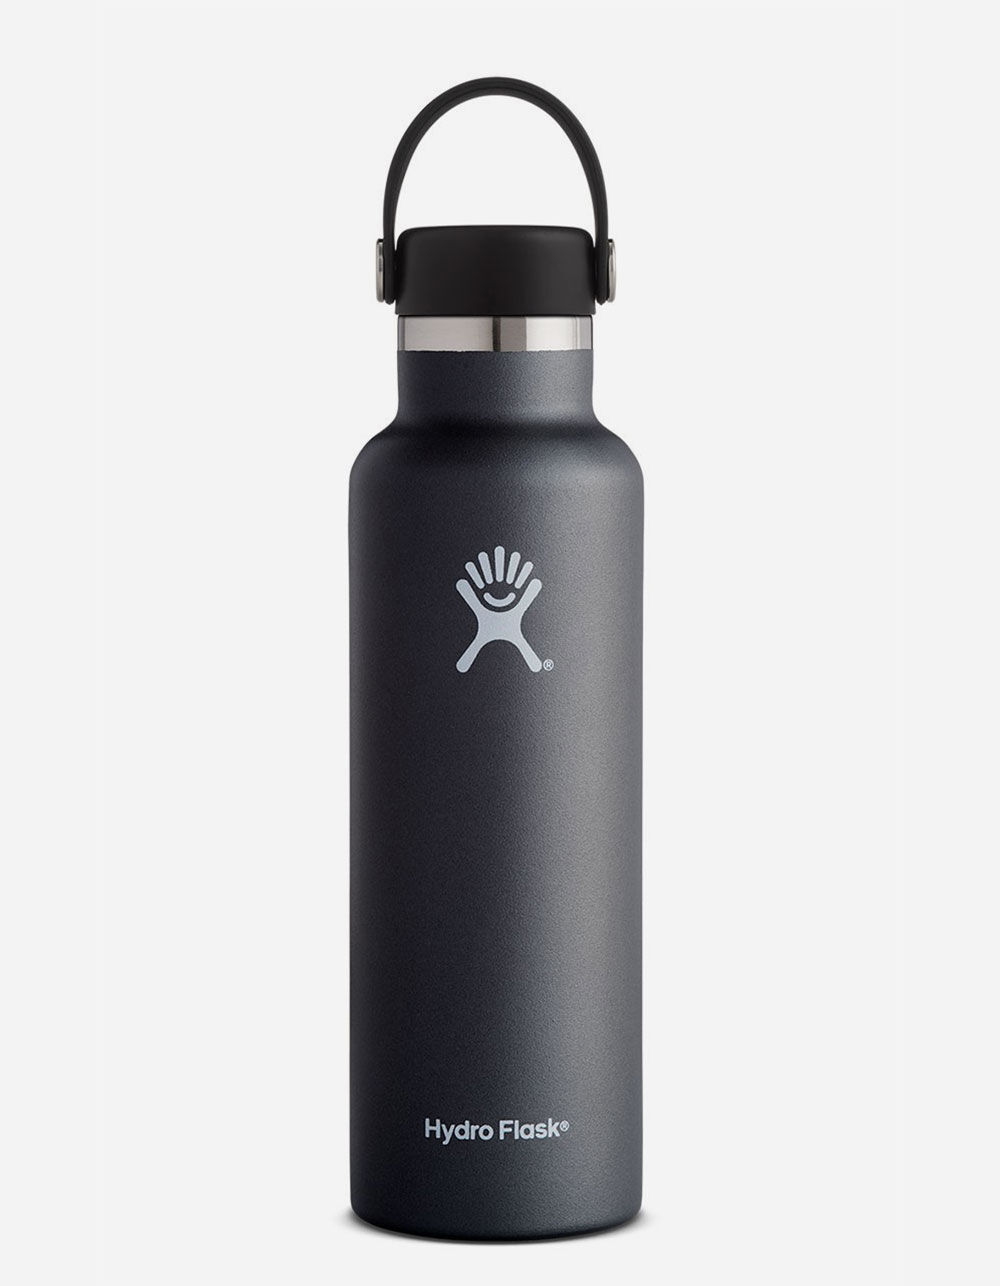 Hydro Flask 21 oz TEST REVIEW I